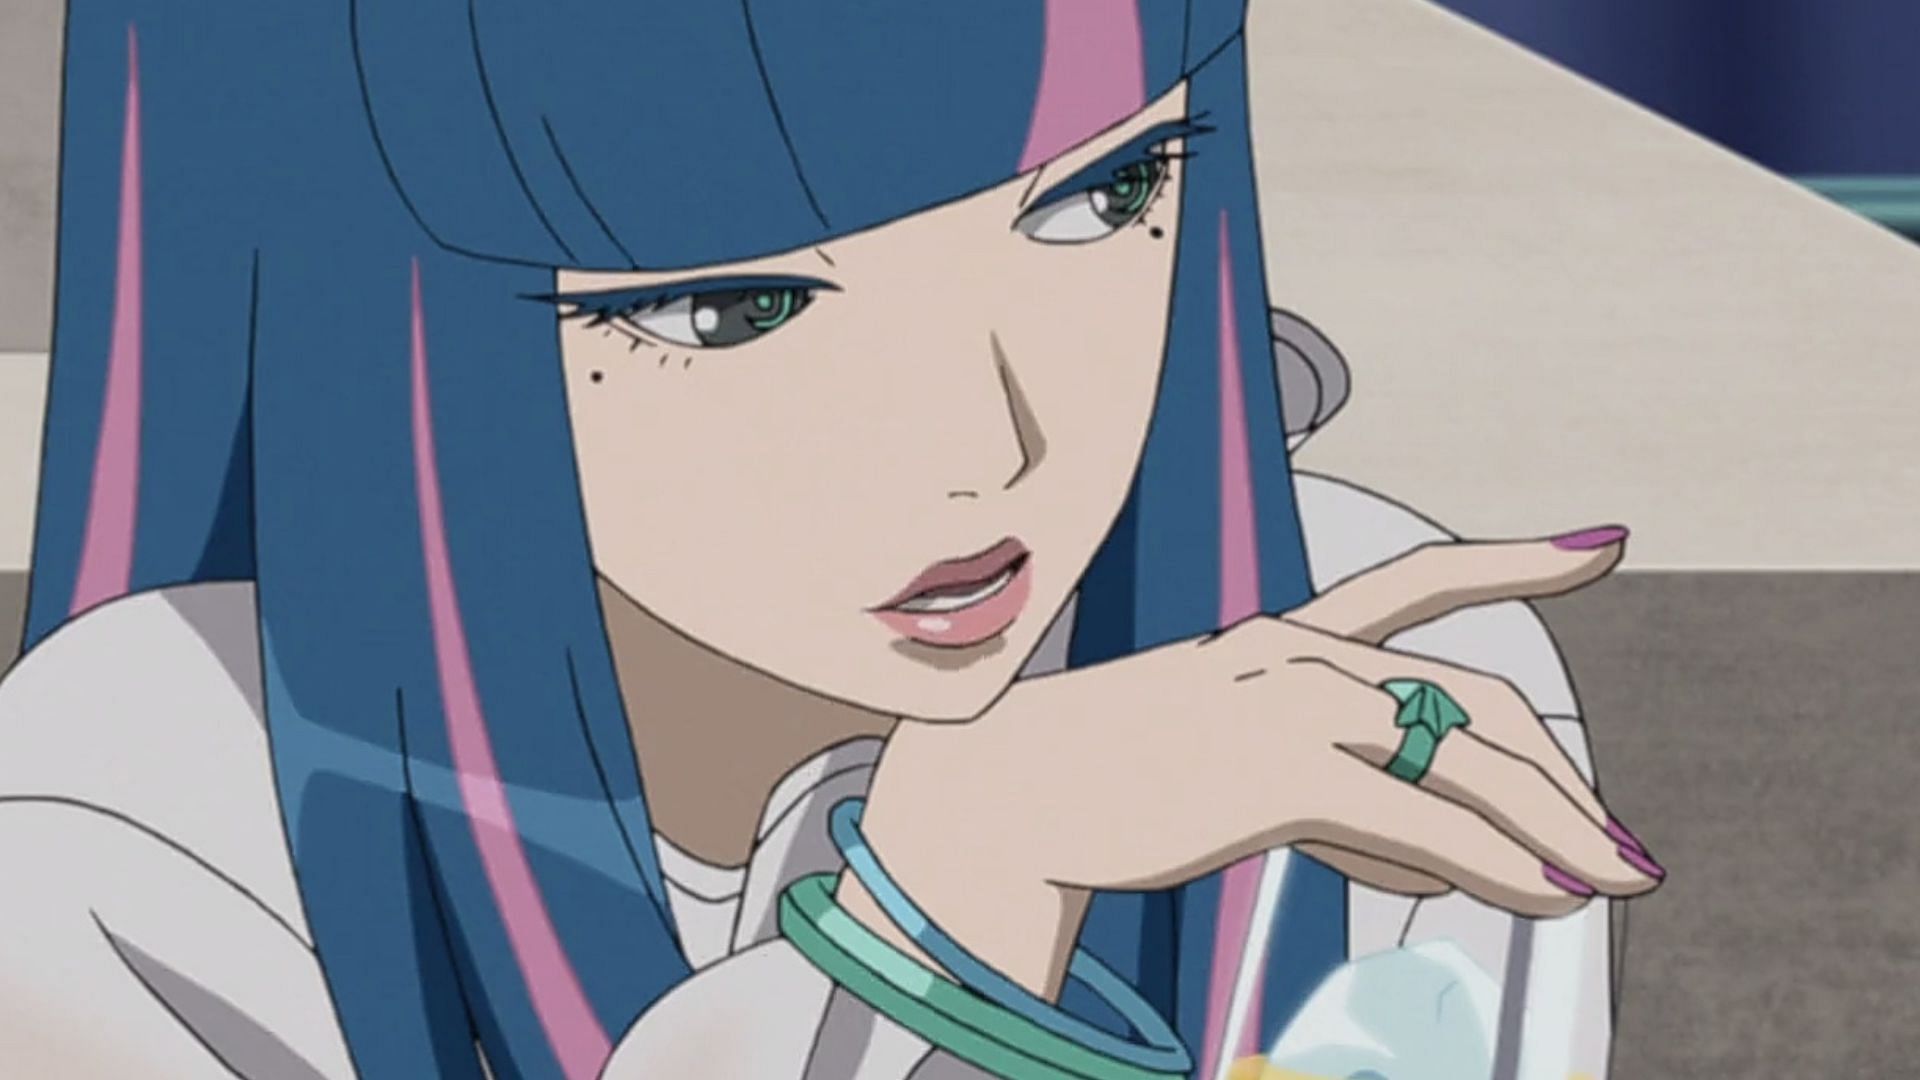 Eida as seen in the upcoming episode 288 preview (image via Studio Pierrot)